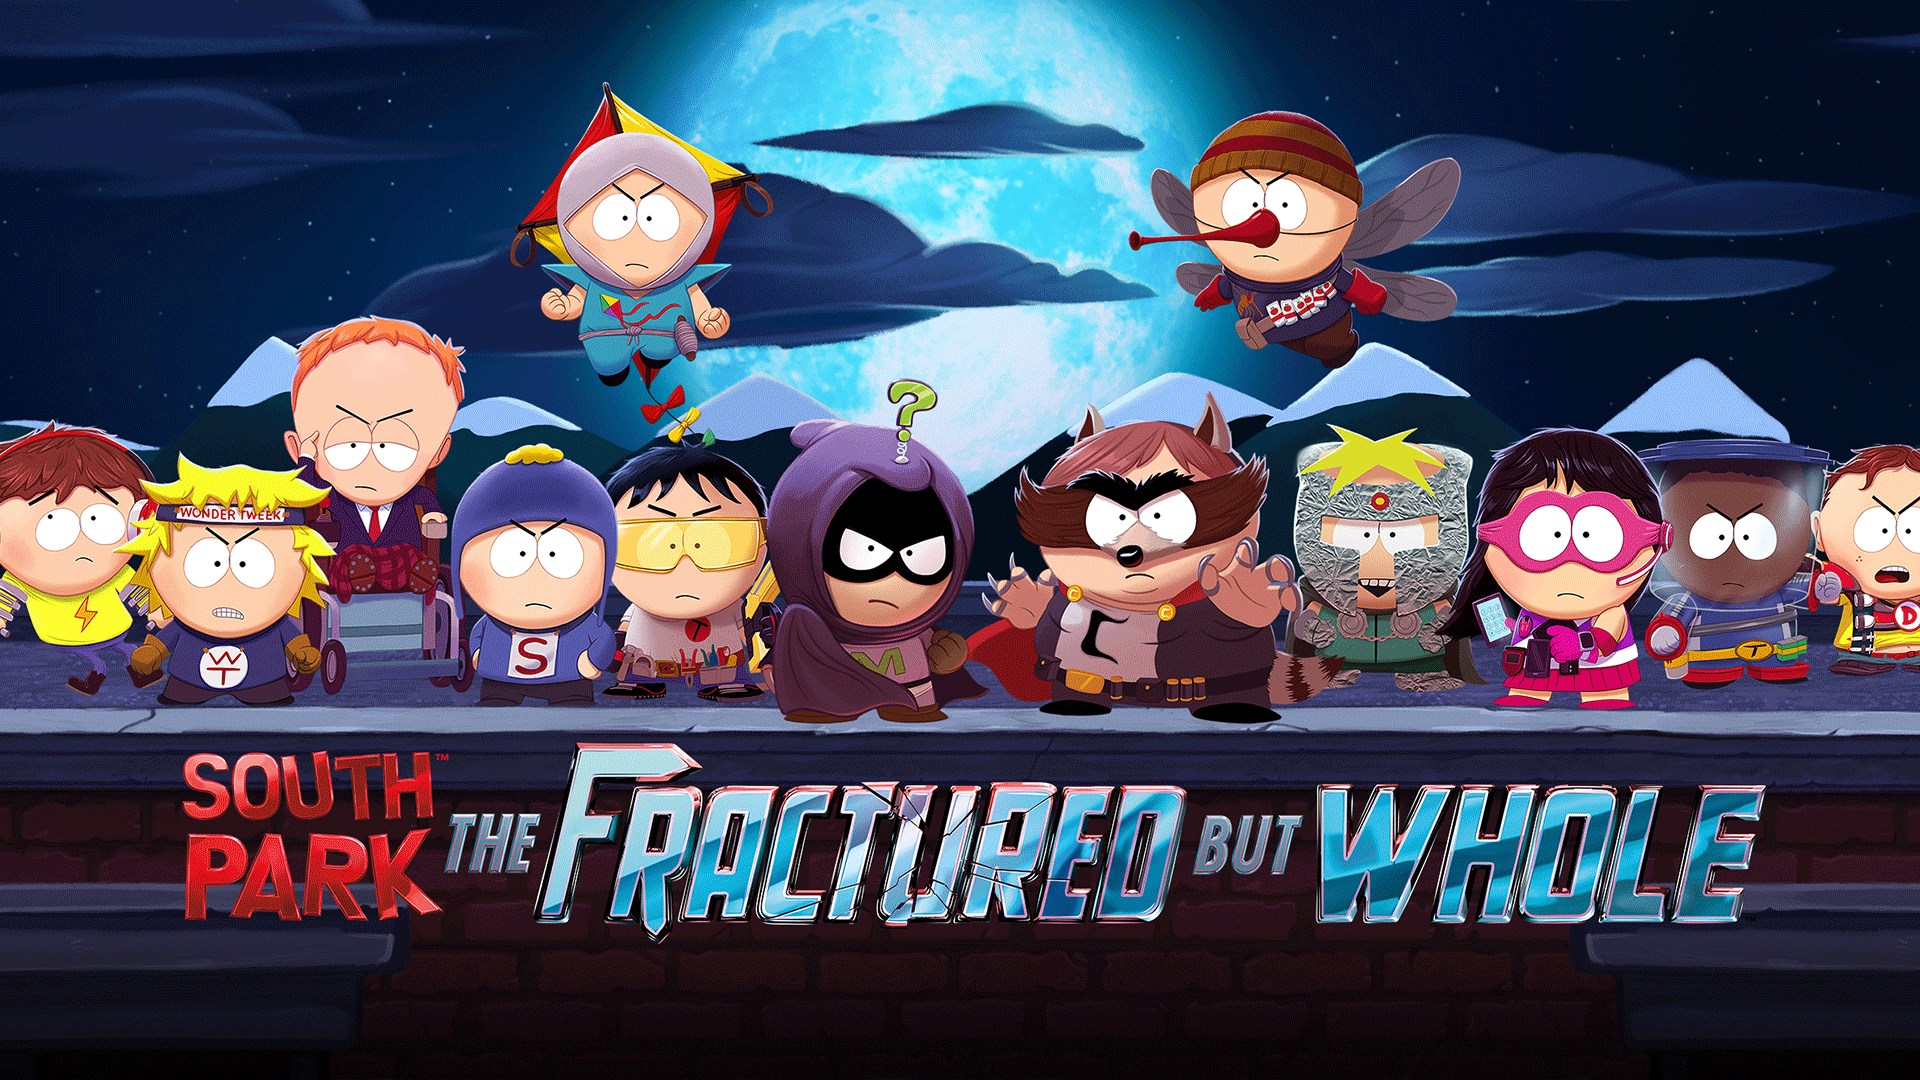 South park the fractured but whole купить ключ steam дешево фото 75